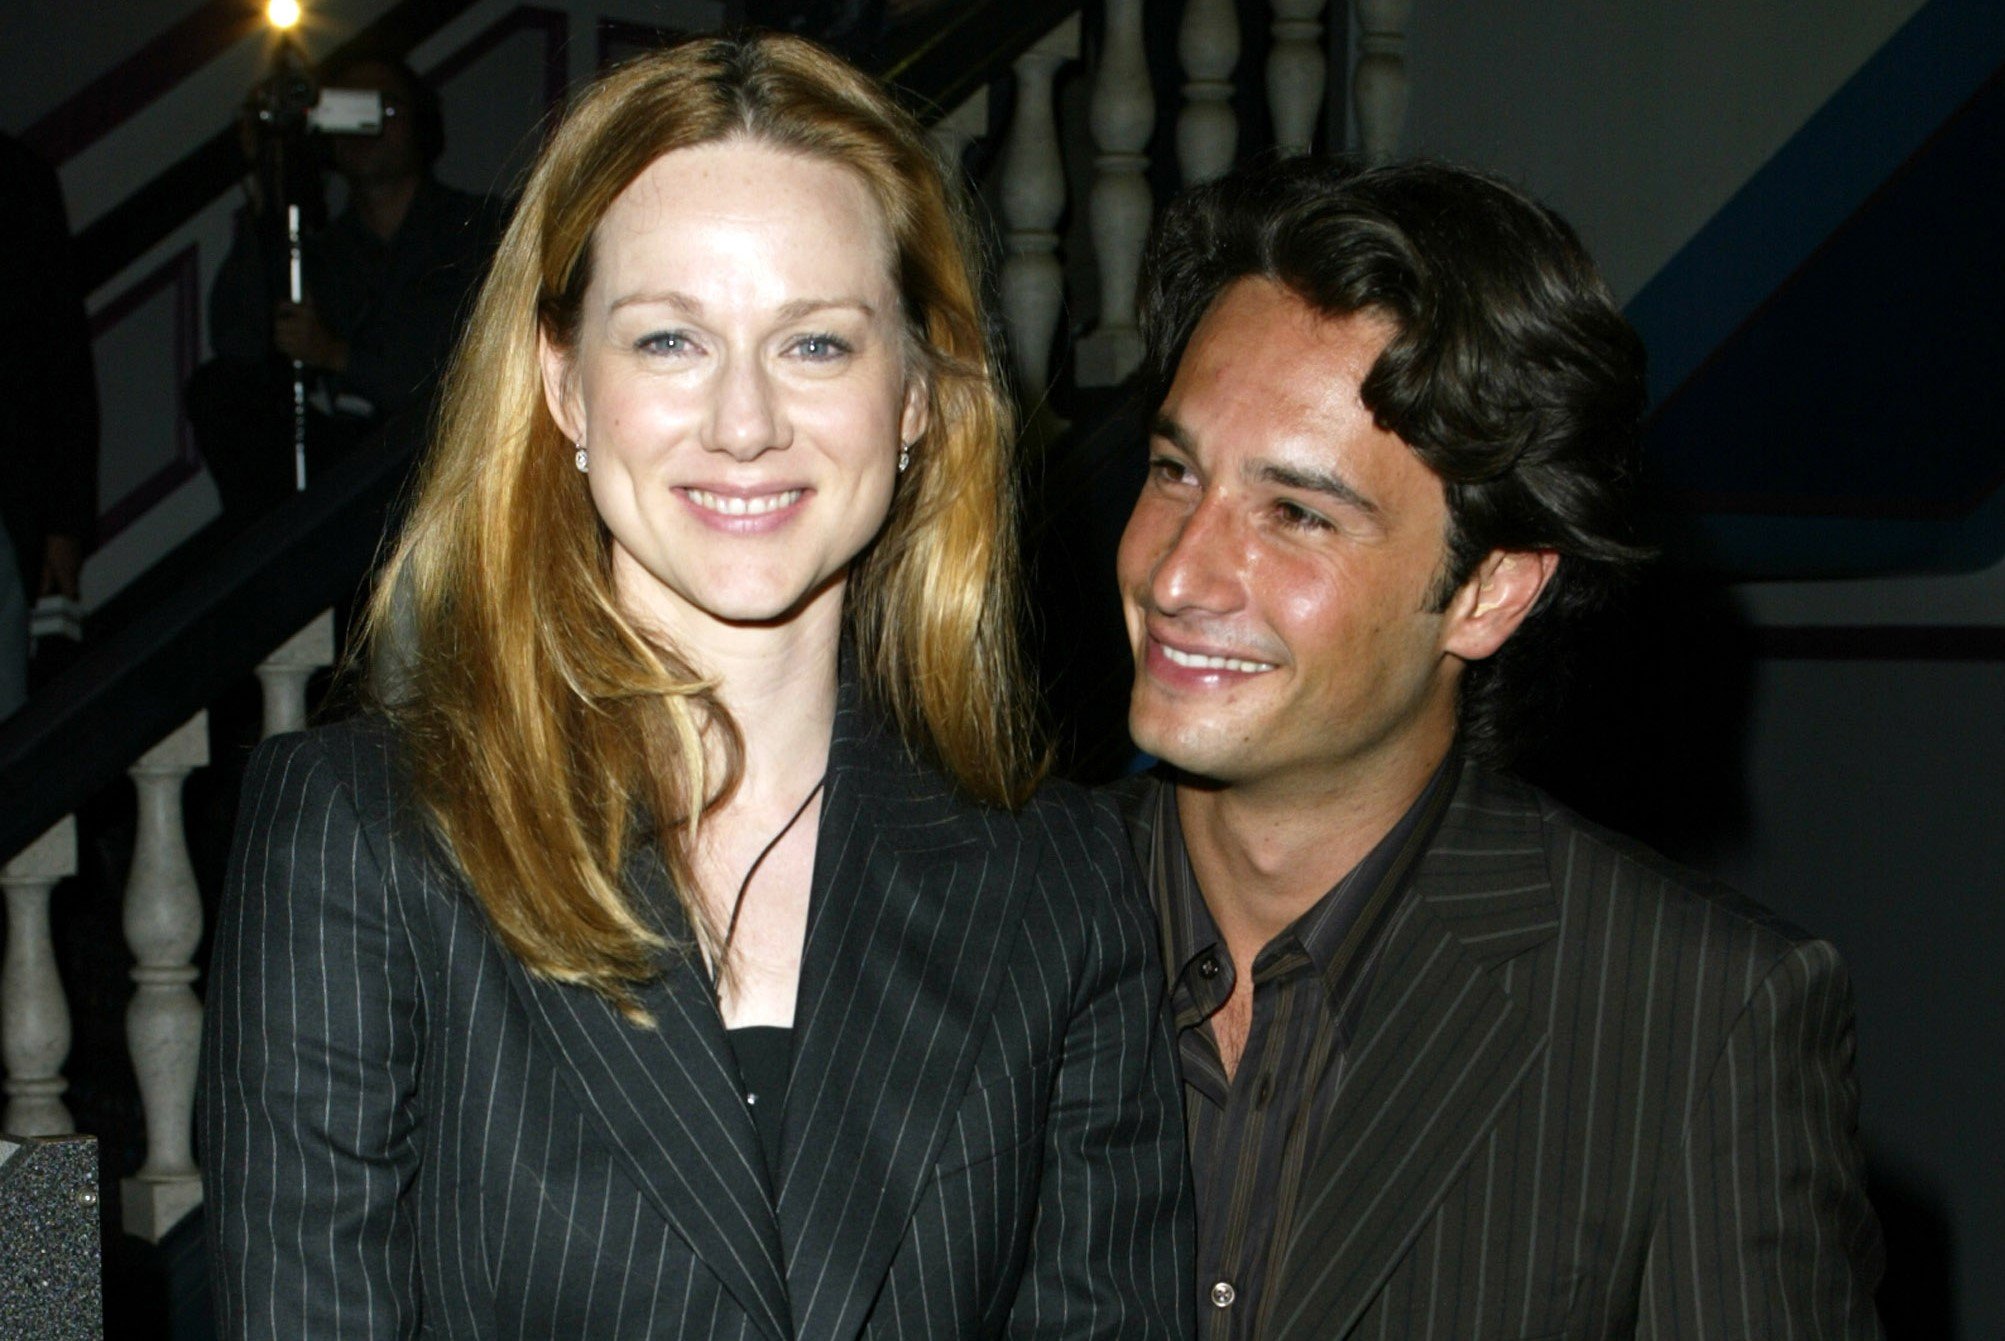 Laura Linney, who appeared in the 'Love Actually' sequel, poses for pictures with Rodrigo Santoro. They wear black suits with thin vertical white stripes.